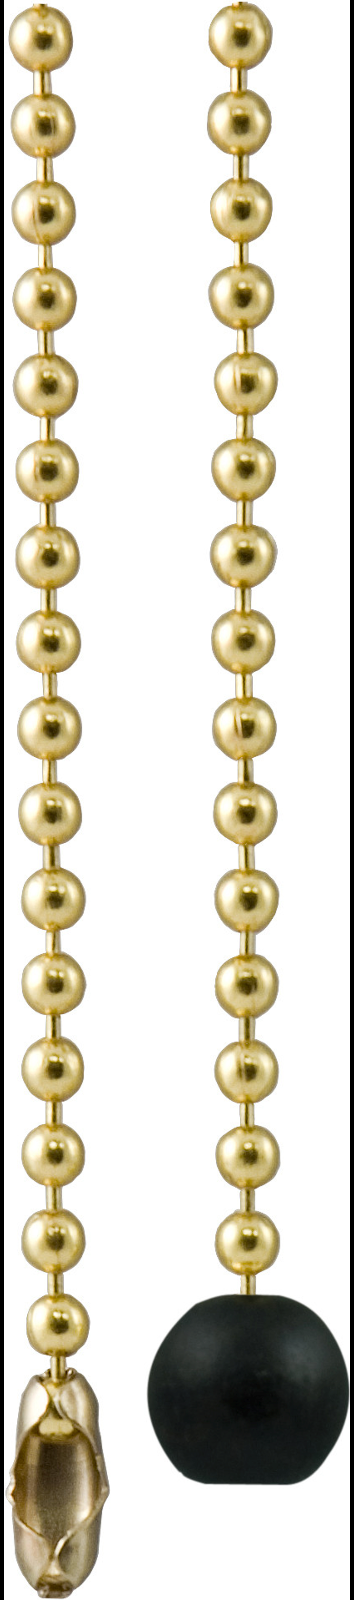 Wooden Ball PULL + 36" Polished Brass beaded chain #6 Ball w/ connector GE 54433 - $14.03